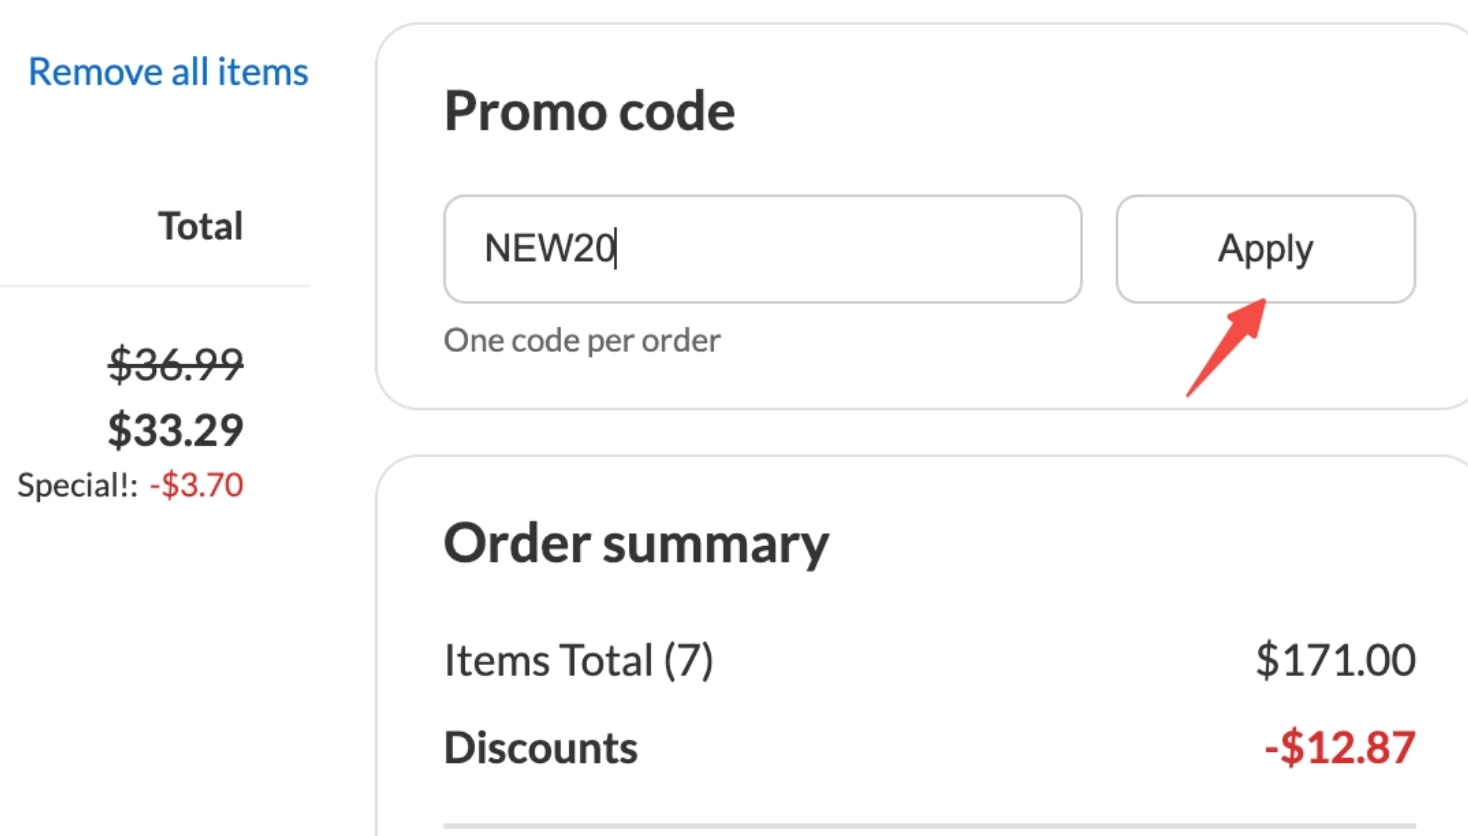 Step 3: When checking out at cozywinters.com, paste the discount code into the specified promotional code box.